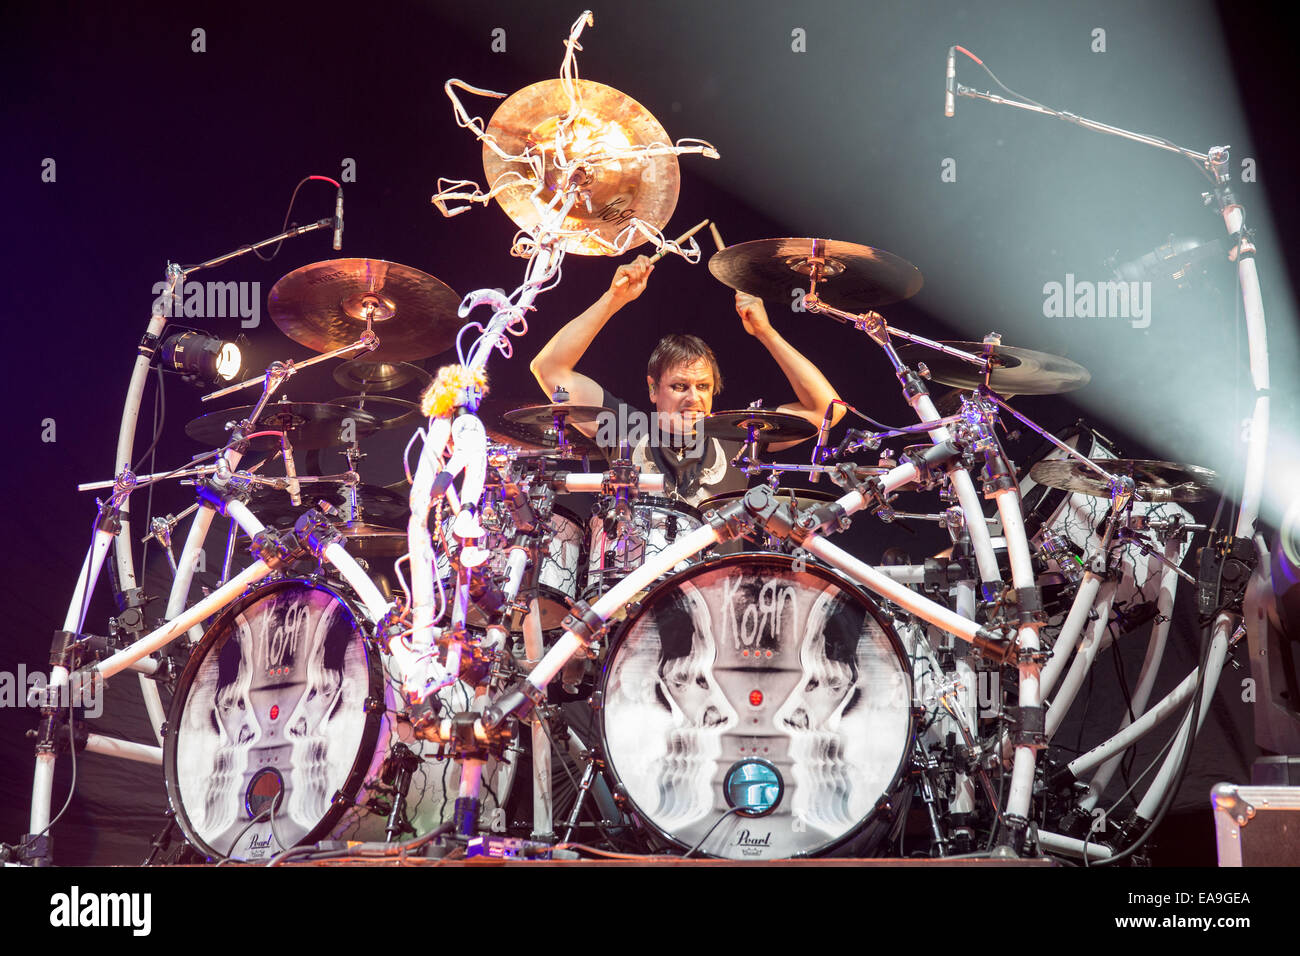 Madison, Wisconsin, USA. 8th Nov, 2014. Drummer RAY LUZIER of the band Korn performs live at the Alliant Energy Center in Madison, WIsconsin © Daniel DeSlover/ZUMA Wire/Alamy Live News Stock Photo